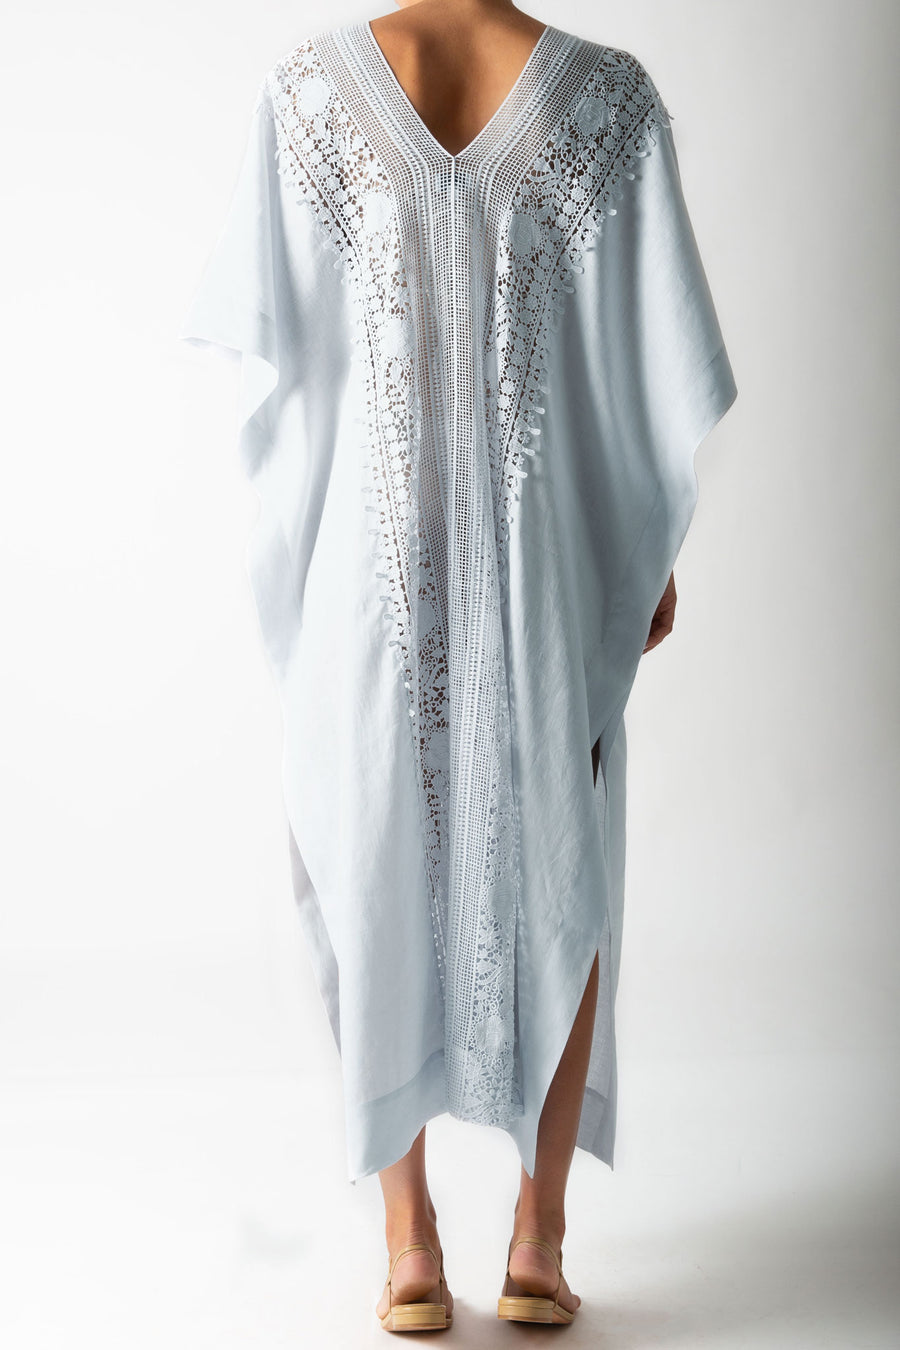 This is a photo of the back view of a woman wearing a light blue linen caftan with lace trim down the center.